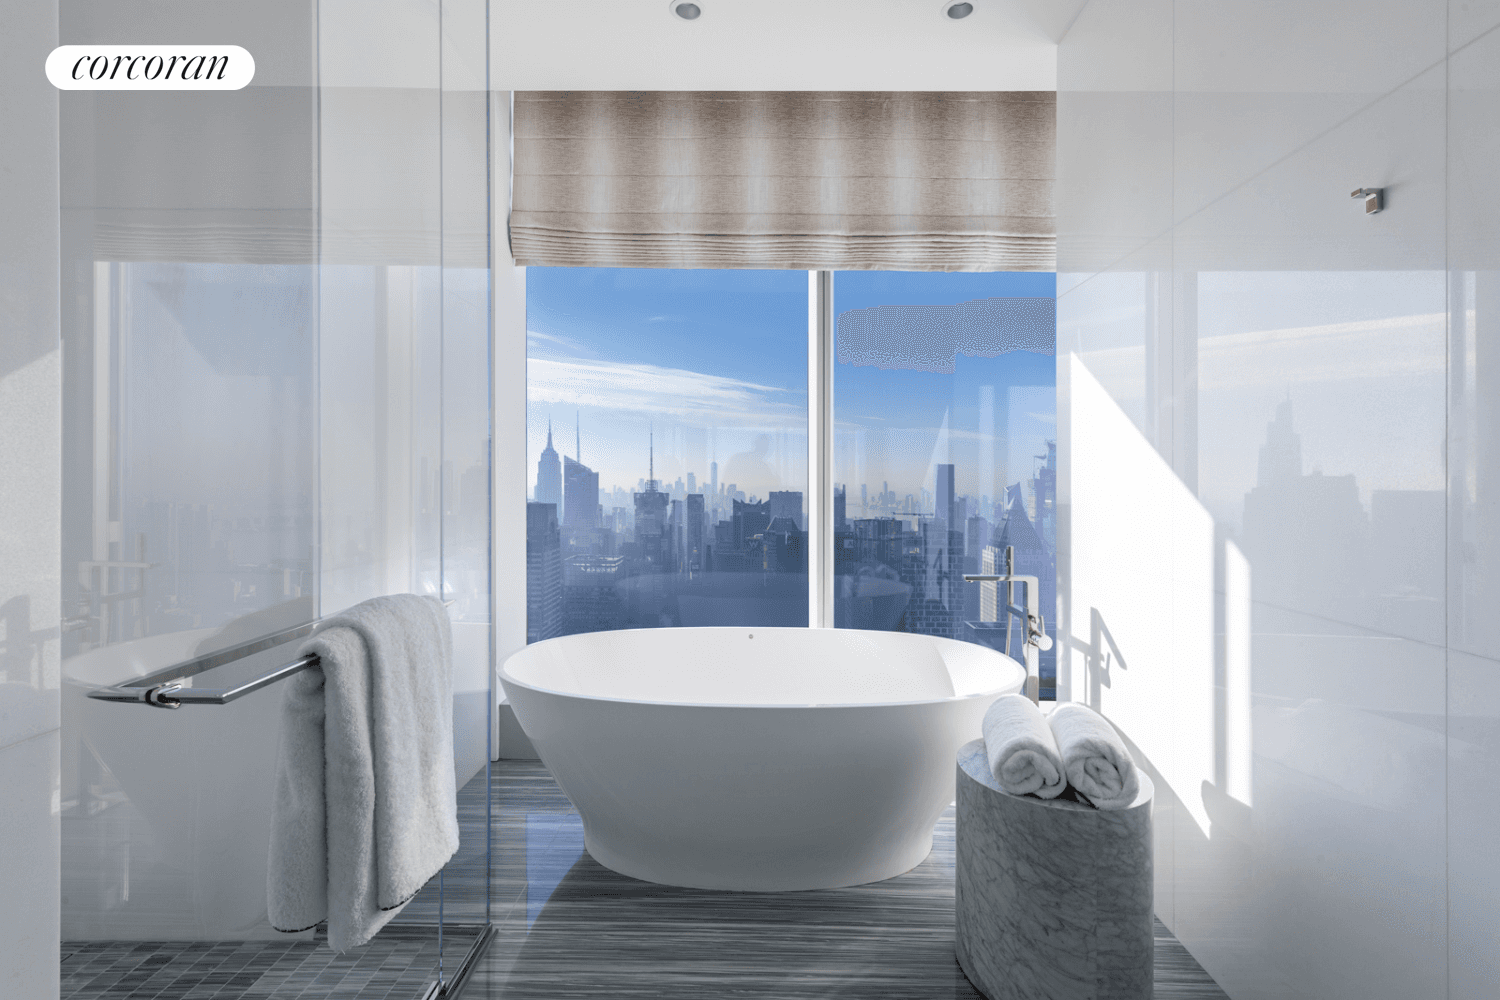 Reside over 825' above New York City in this half floor residence at Central Park Tower.